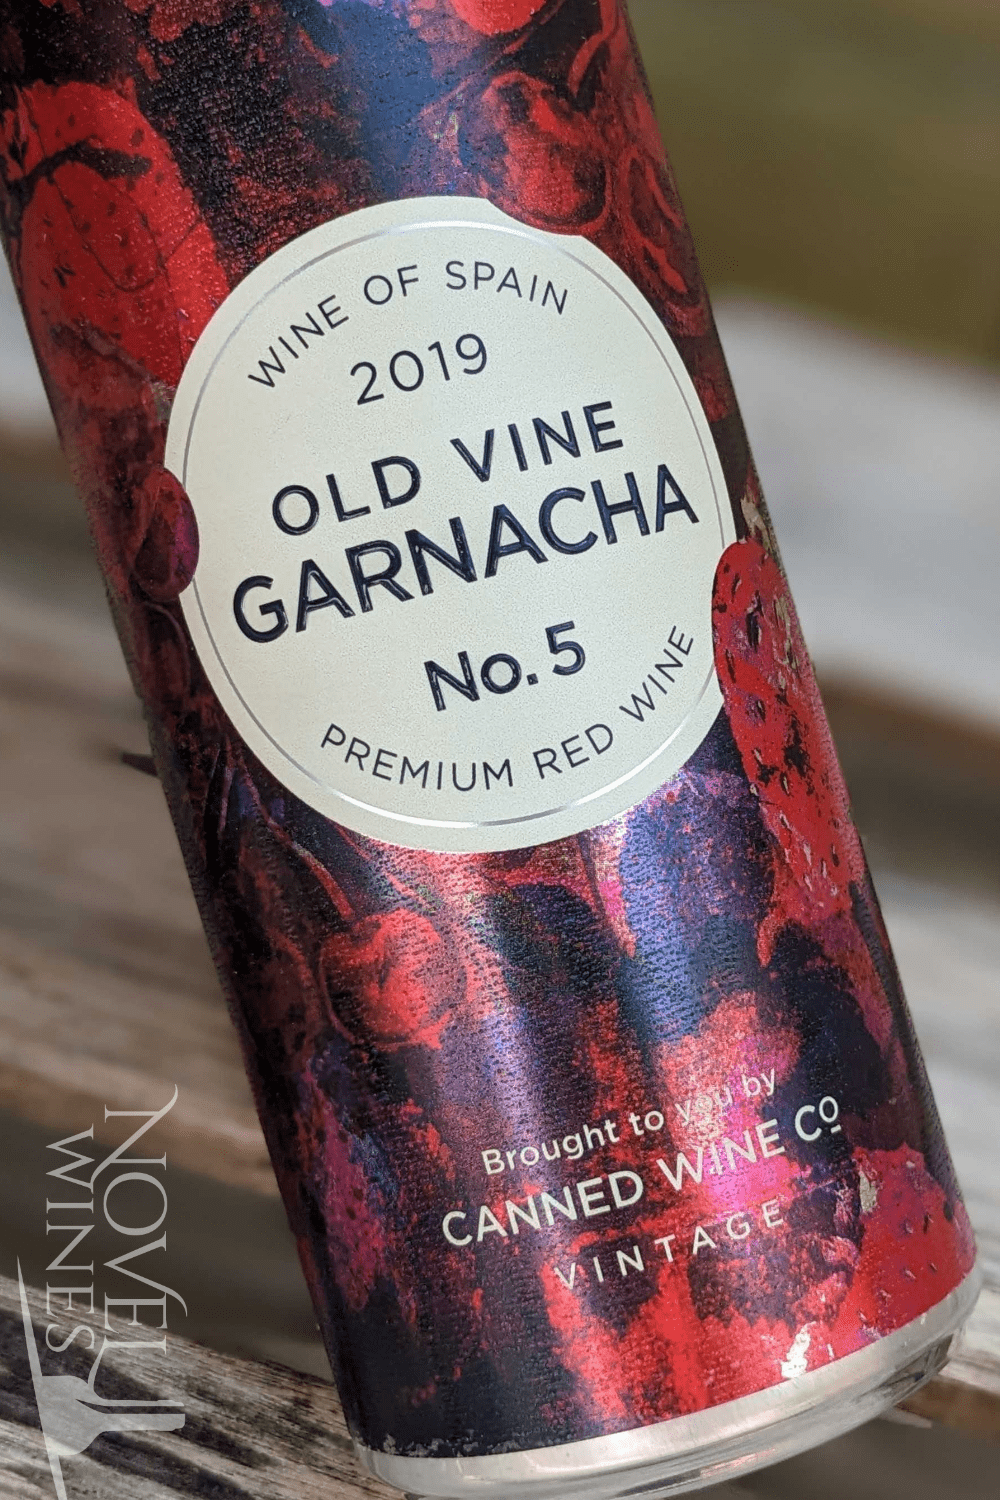 Canned Wine Co Red Wine Canned Wine Co. Vintage Old Vine Garnacha 2016, Spain